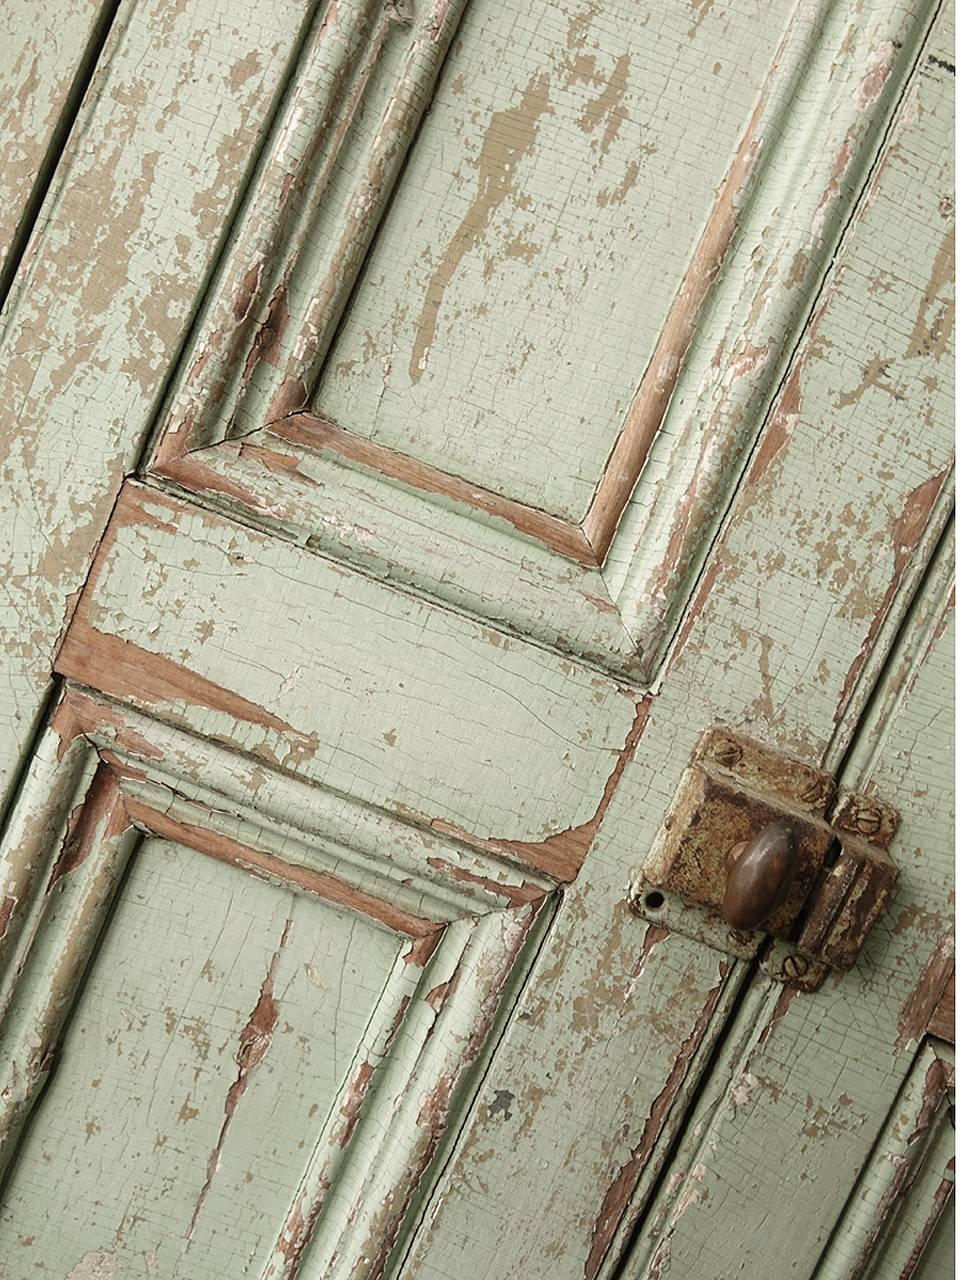 This is just the way we like to find these early farm cupboards. The bottom edge has some rough edges. The original paint is mostly there with a wonderful aged patina. The pale green is a pleasing color plus the contrasting wood showing through the